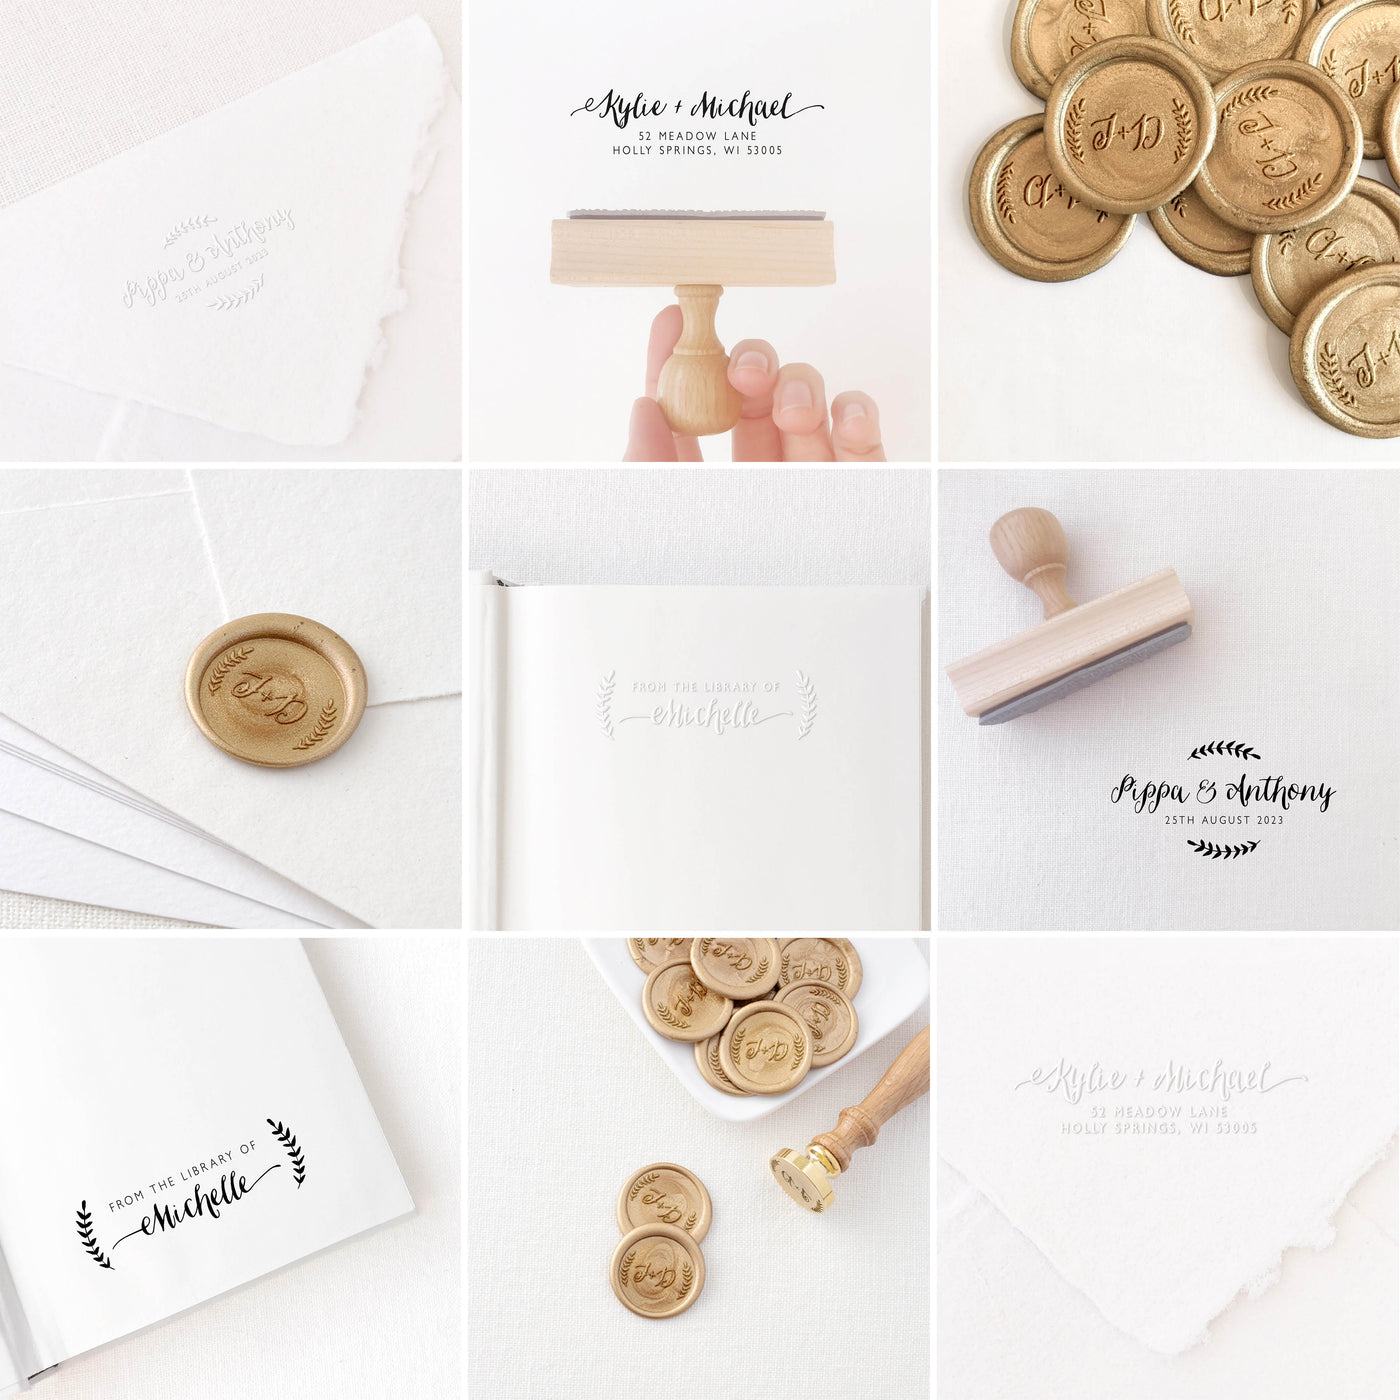 Hayley Rustic Botanical Script Collection | Custom Rubber Stamp, Wax Seal Stickers & Embosser for Custom Luxe Embellishment Packaging & Fine Art Wedding Stationery Invitations | Heirloom Seals